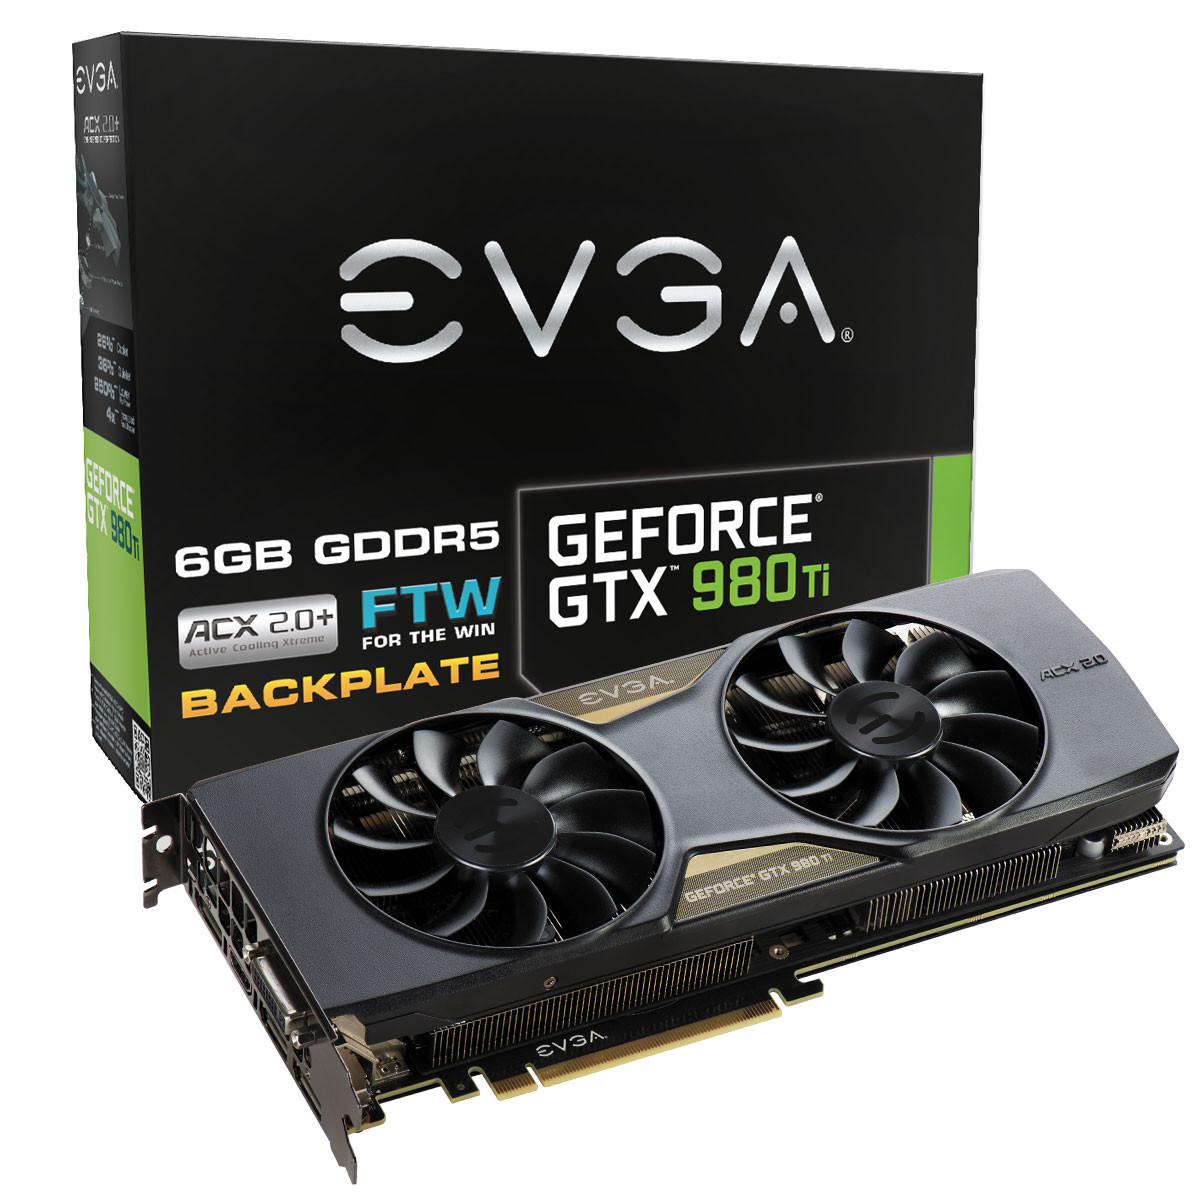 Media asset in full size related to 3dfxzone.it news item entitled as follows: Overclocking: EVGA annuncia la video card GeForce GTX 980 Ti FTW | Image Name: news23055_EVGA-GeForce-GTX-980-Ti-FTW_4.jpg